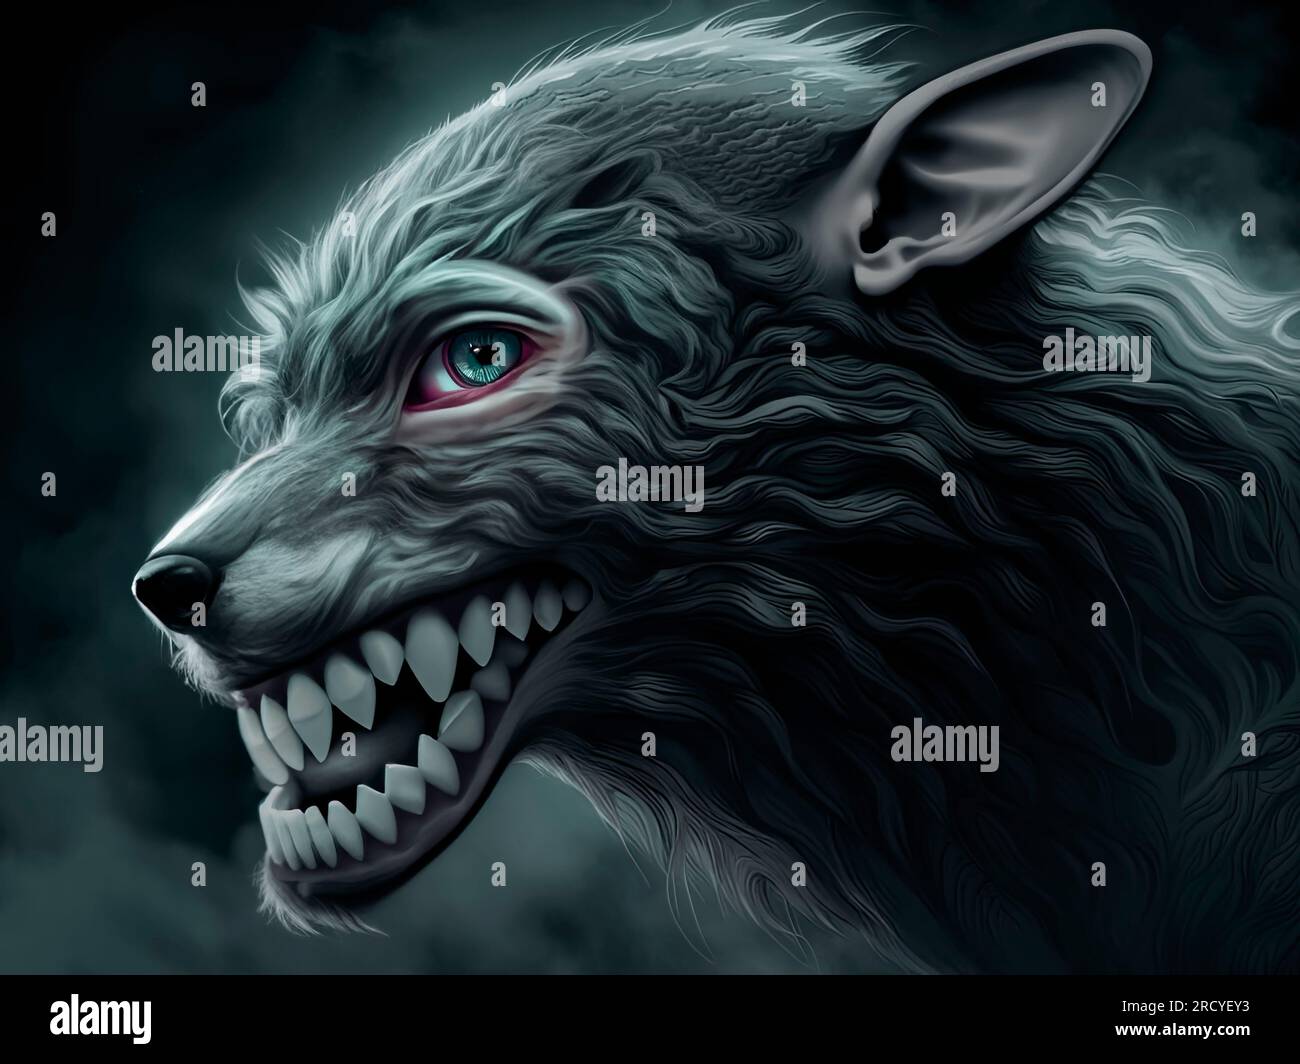 Werewolf face with obvious human features Stock Photo - Alamy